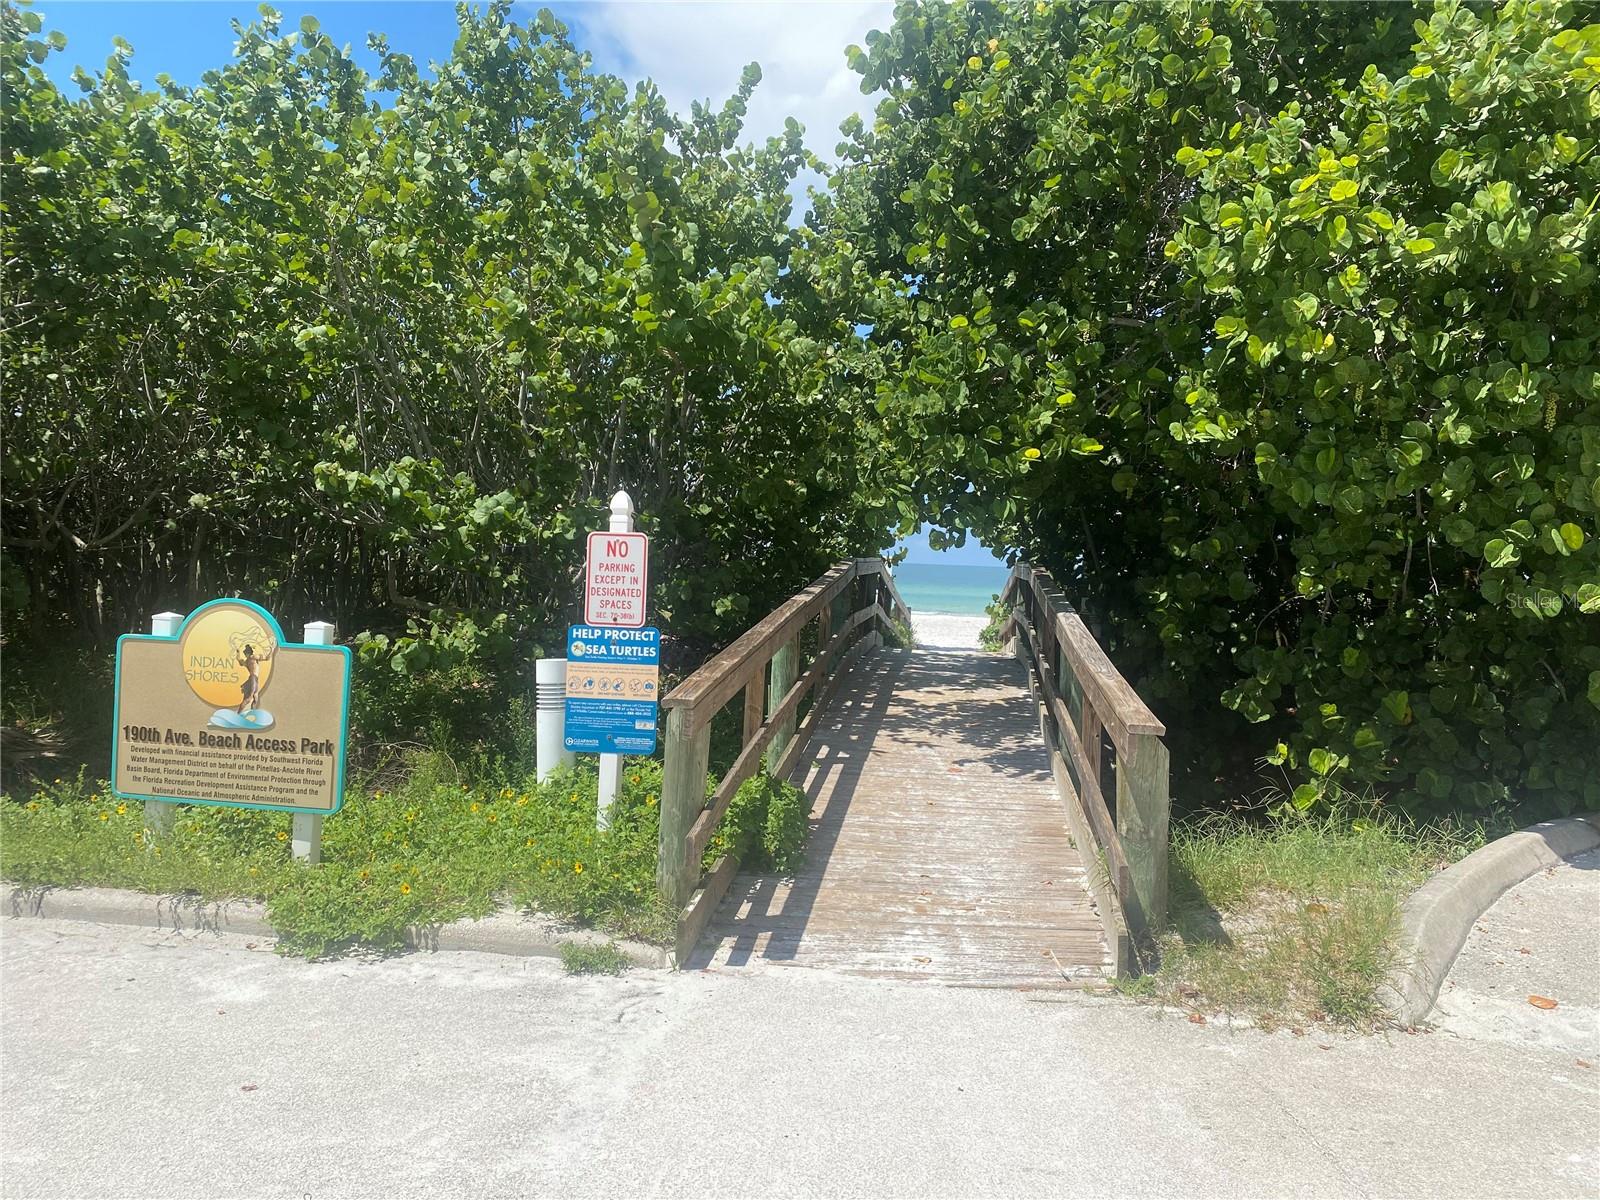 Beach access and parking five minutes away